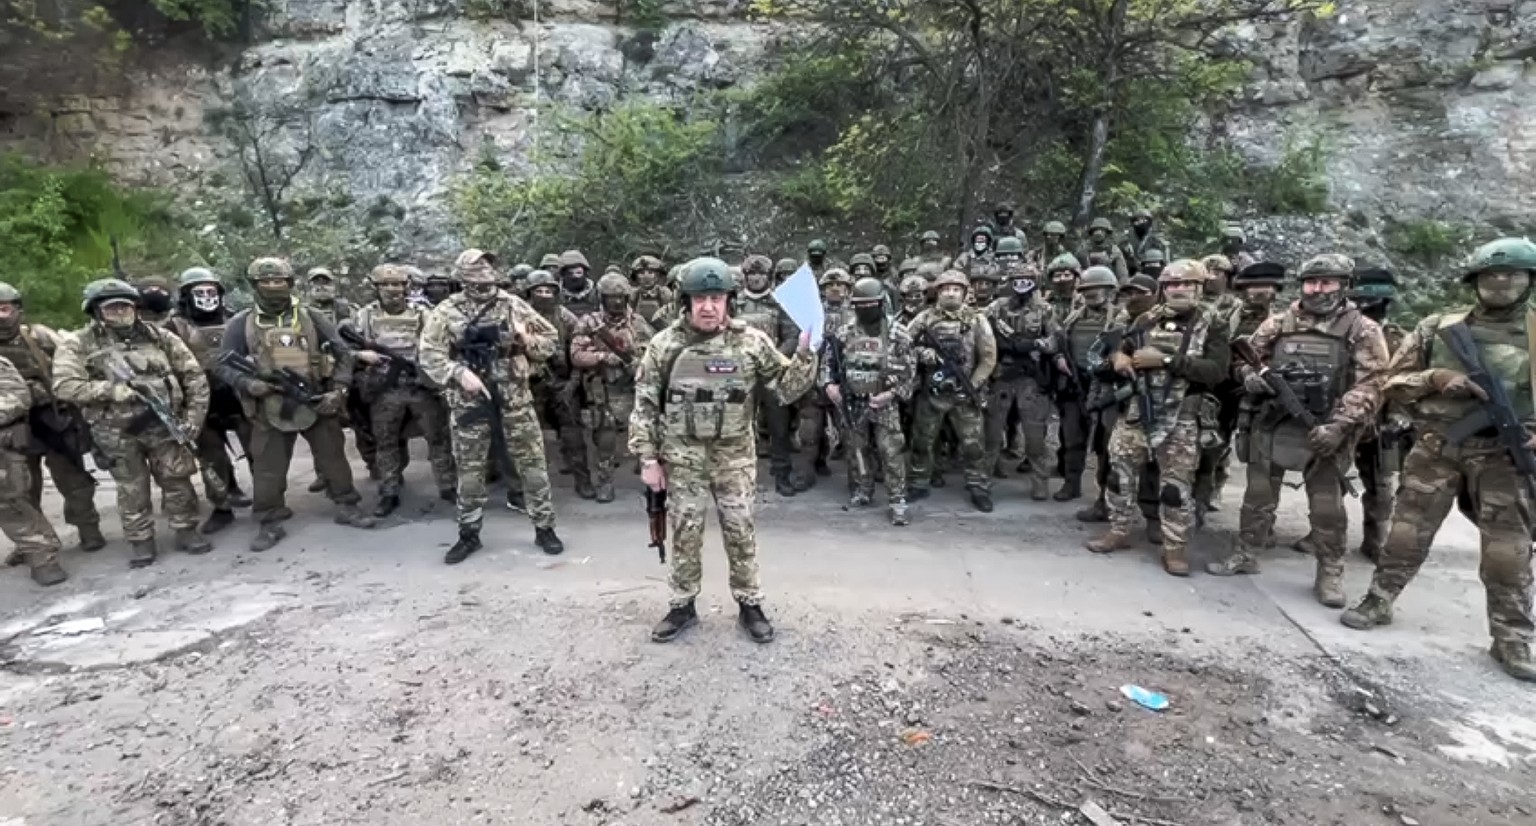 FILE - In this handout image taken from a video released by Prigozhin Press Service on May 5, 2023, head of Wagner Group Yevgeny Prigozhin reads his statement standing in front of his troops in an unk ...